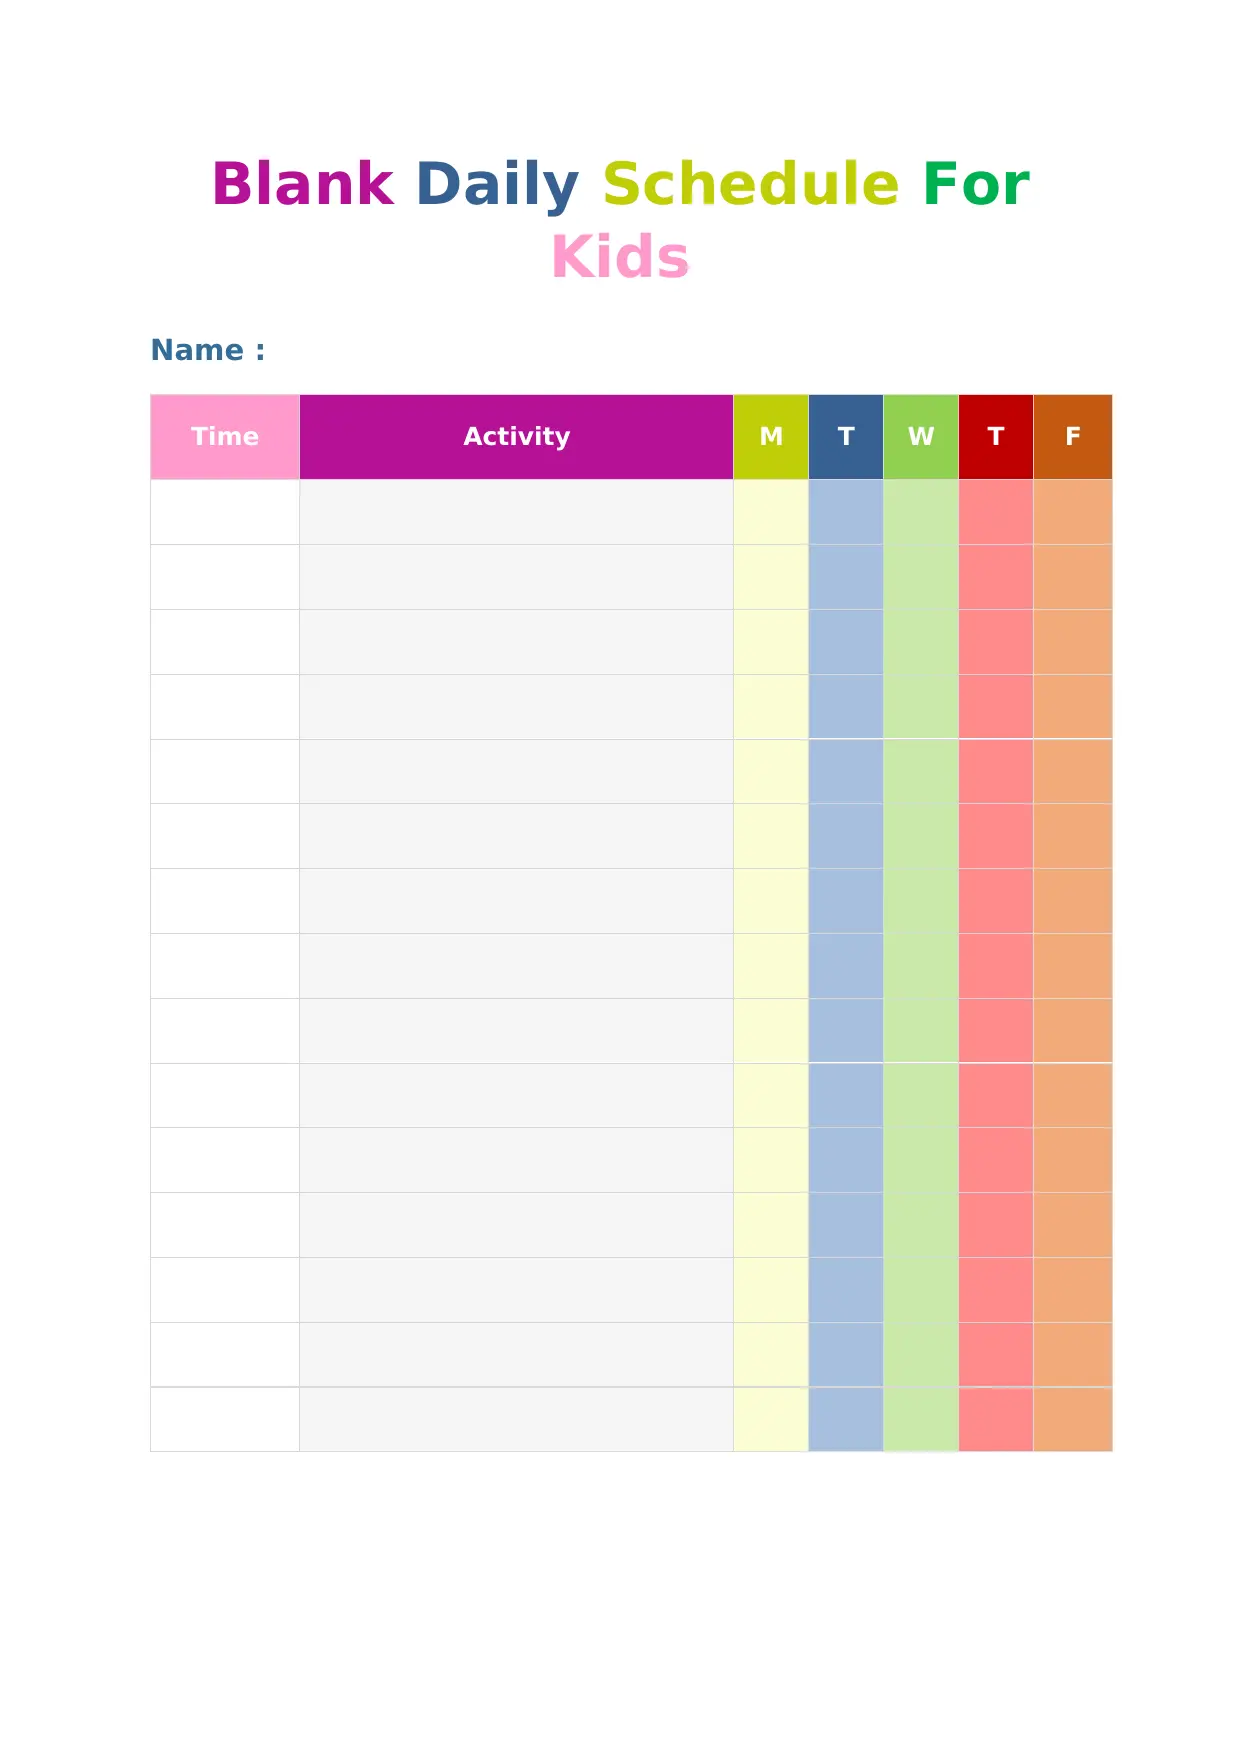 Blank Daily Schedule Template for Kids